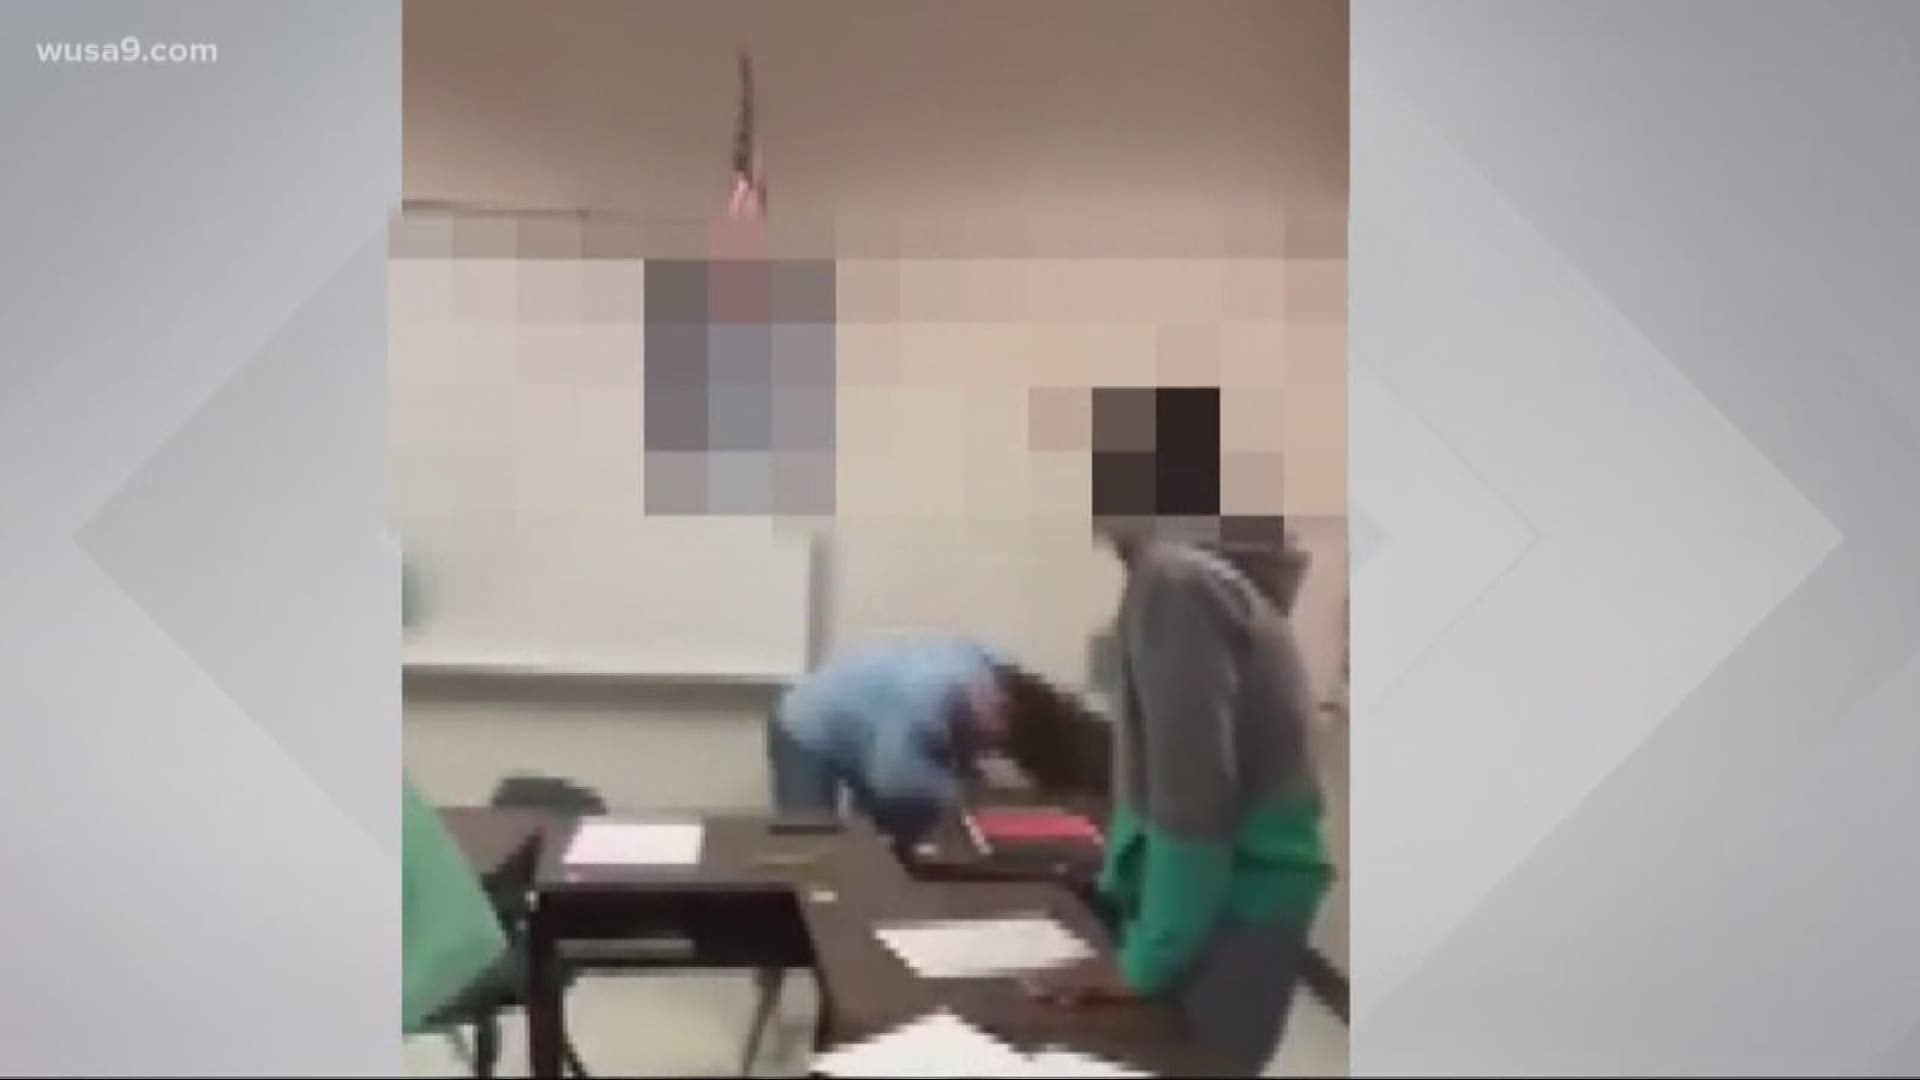 A terrifying attack on a 14-year-old girl in her own middle school classroom was caught on video. The girl's parents say the attacker is threatening her again. They say that Stafford Middle School failed to protect her before and after.